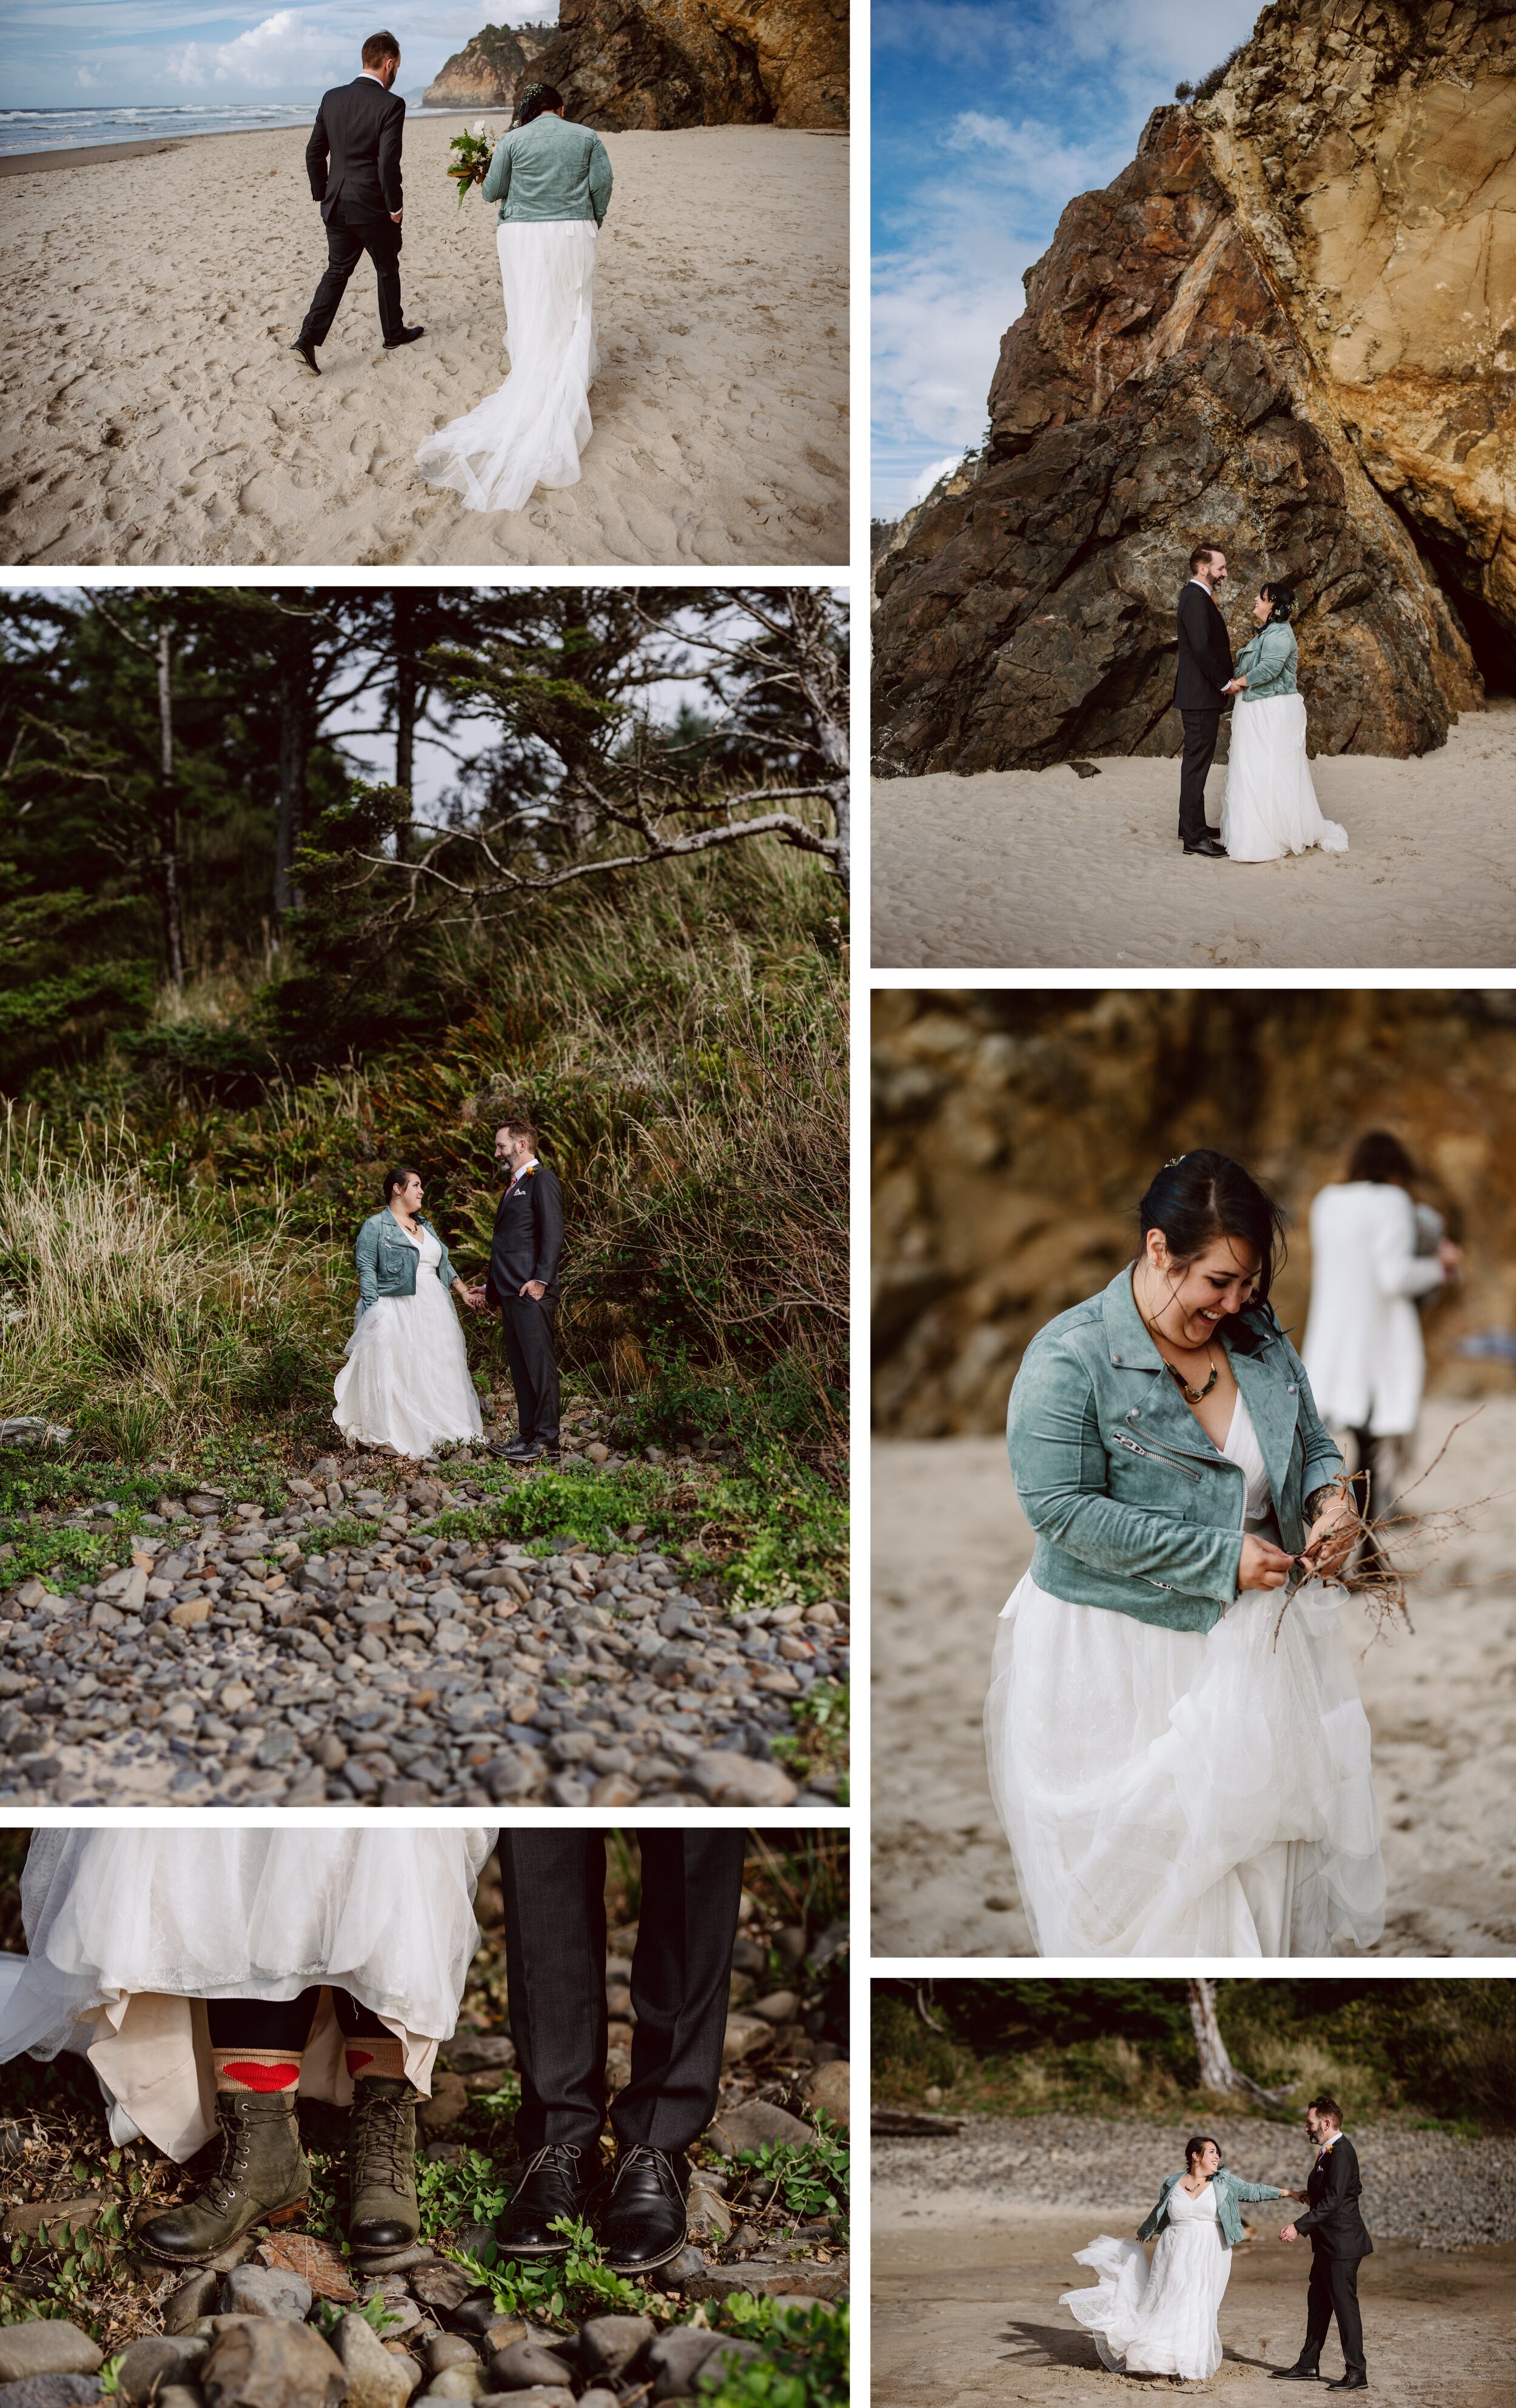 Bride and groom portraits at Hug Point in Oregon for their elopement day